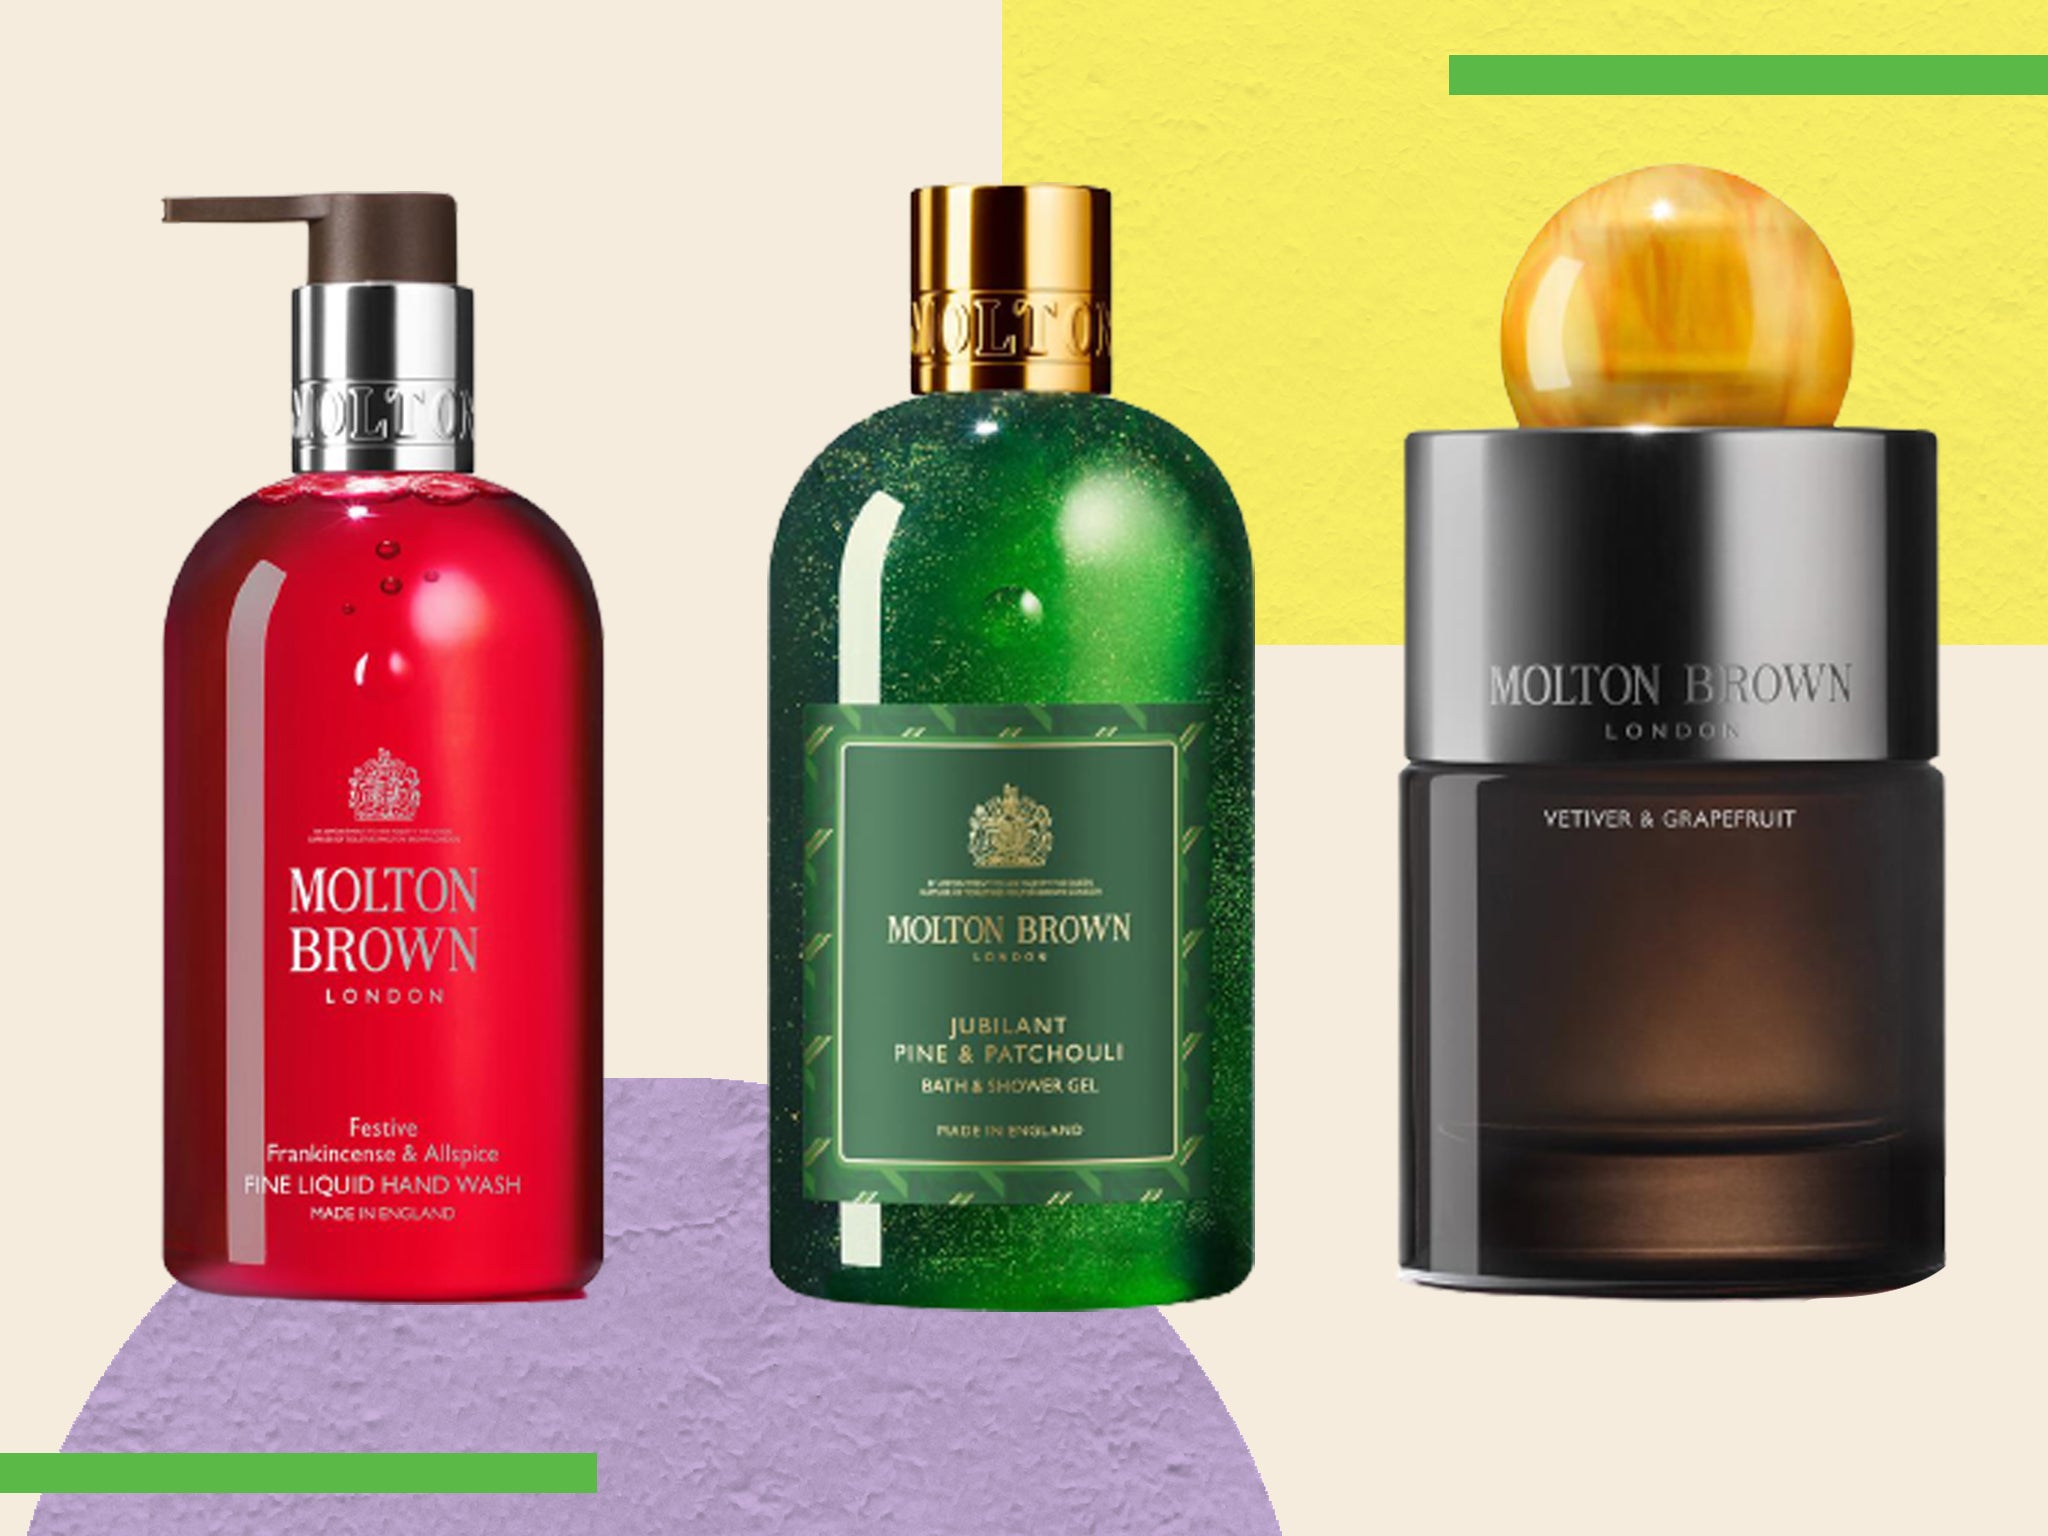 This is a sweet-smelling sale you won’t want to miss out on